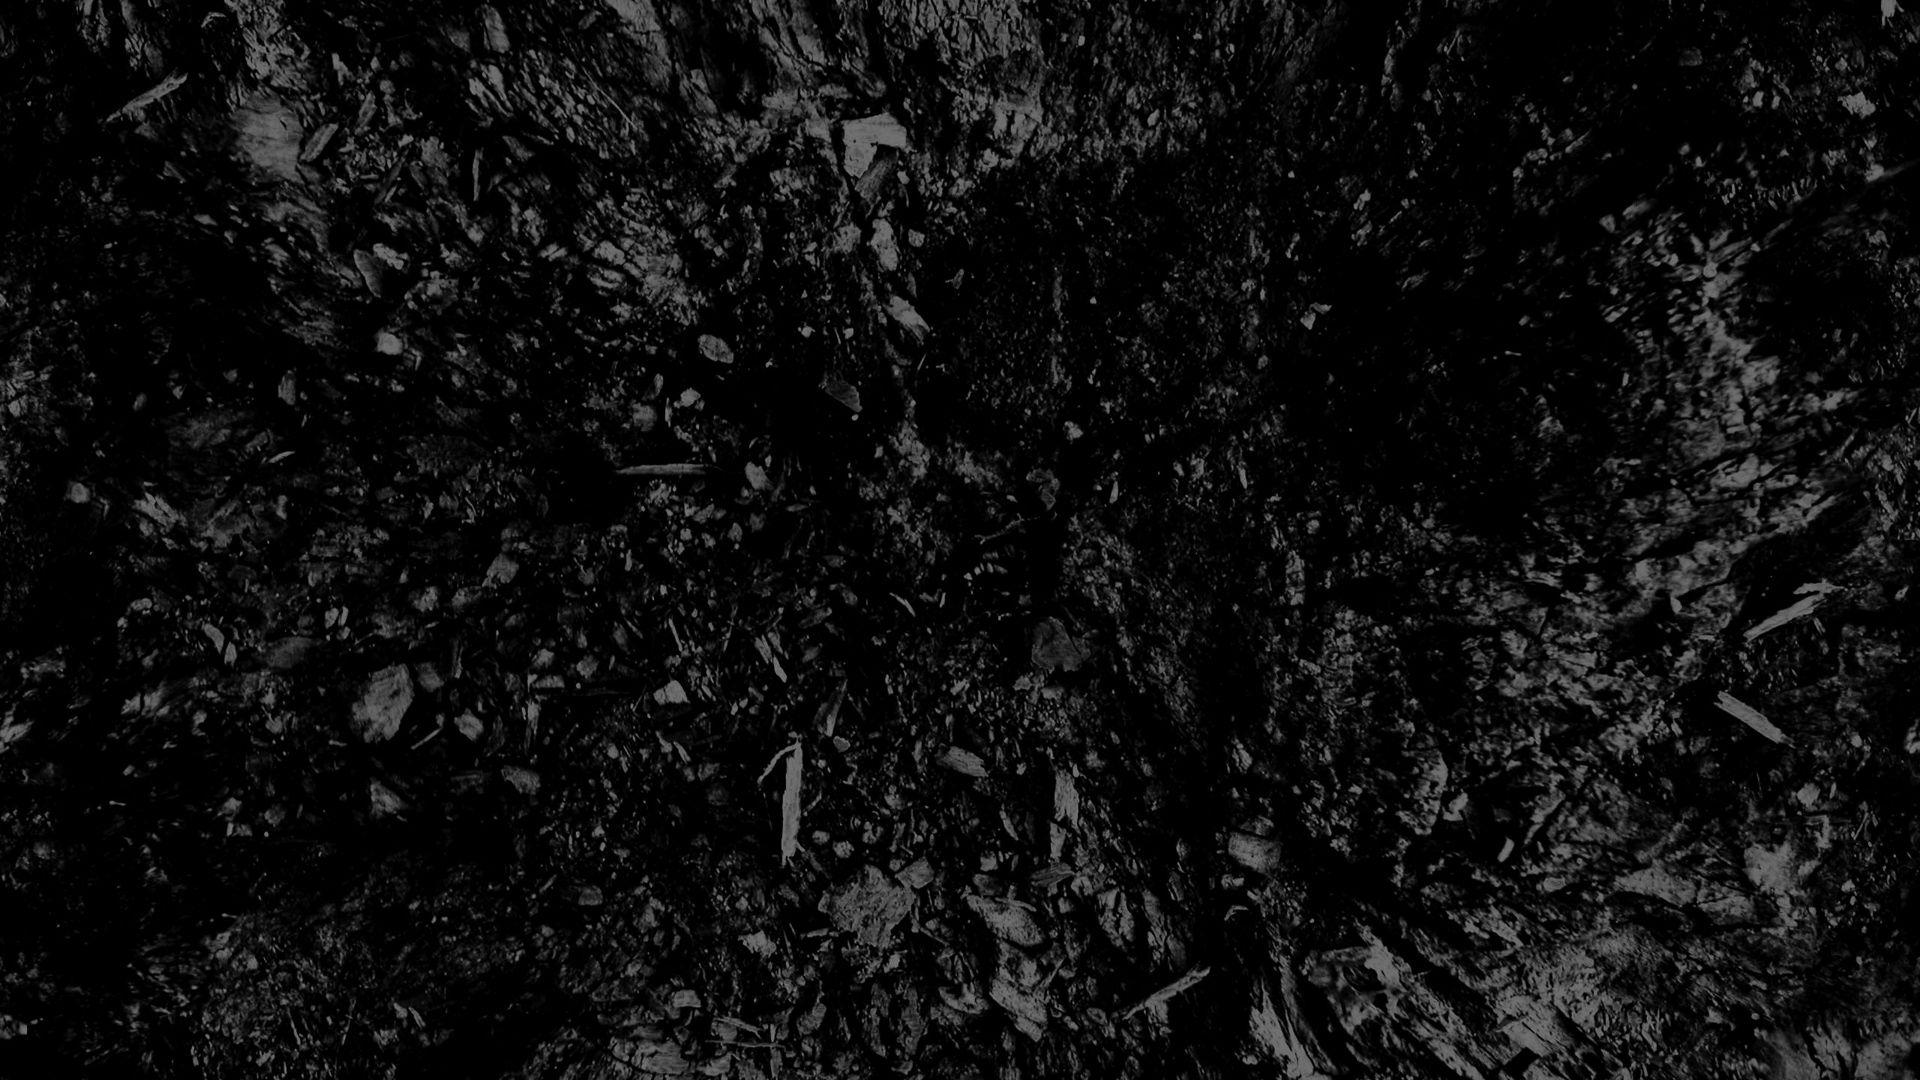 Download wallpaper 1920x1080 dark, black and white, abstract, black